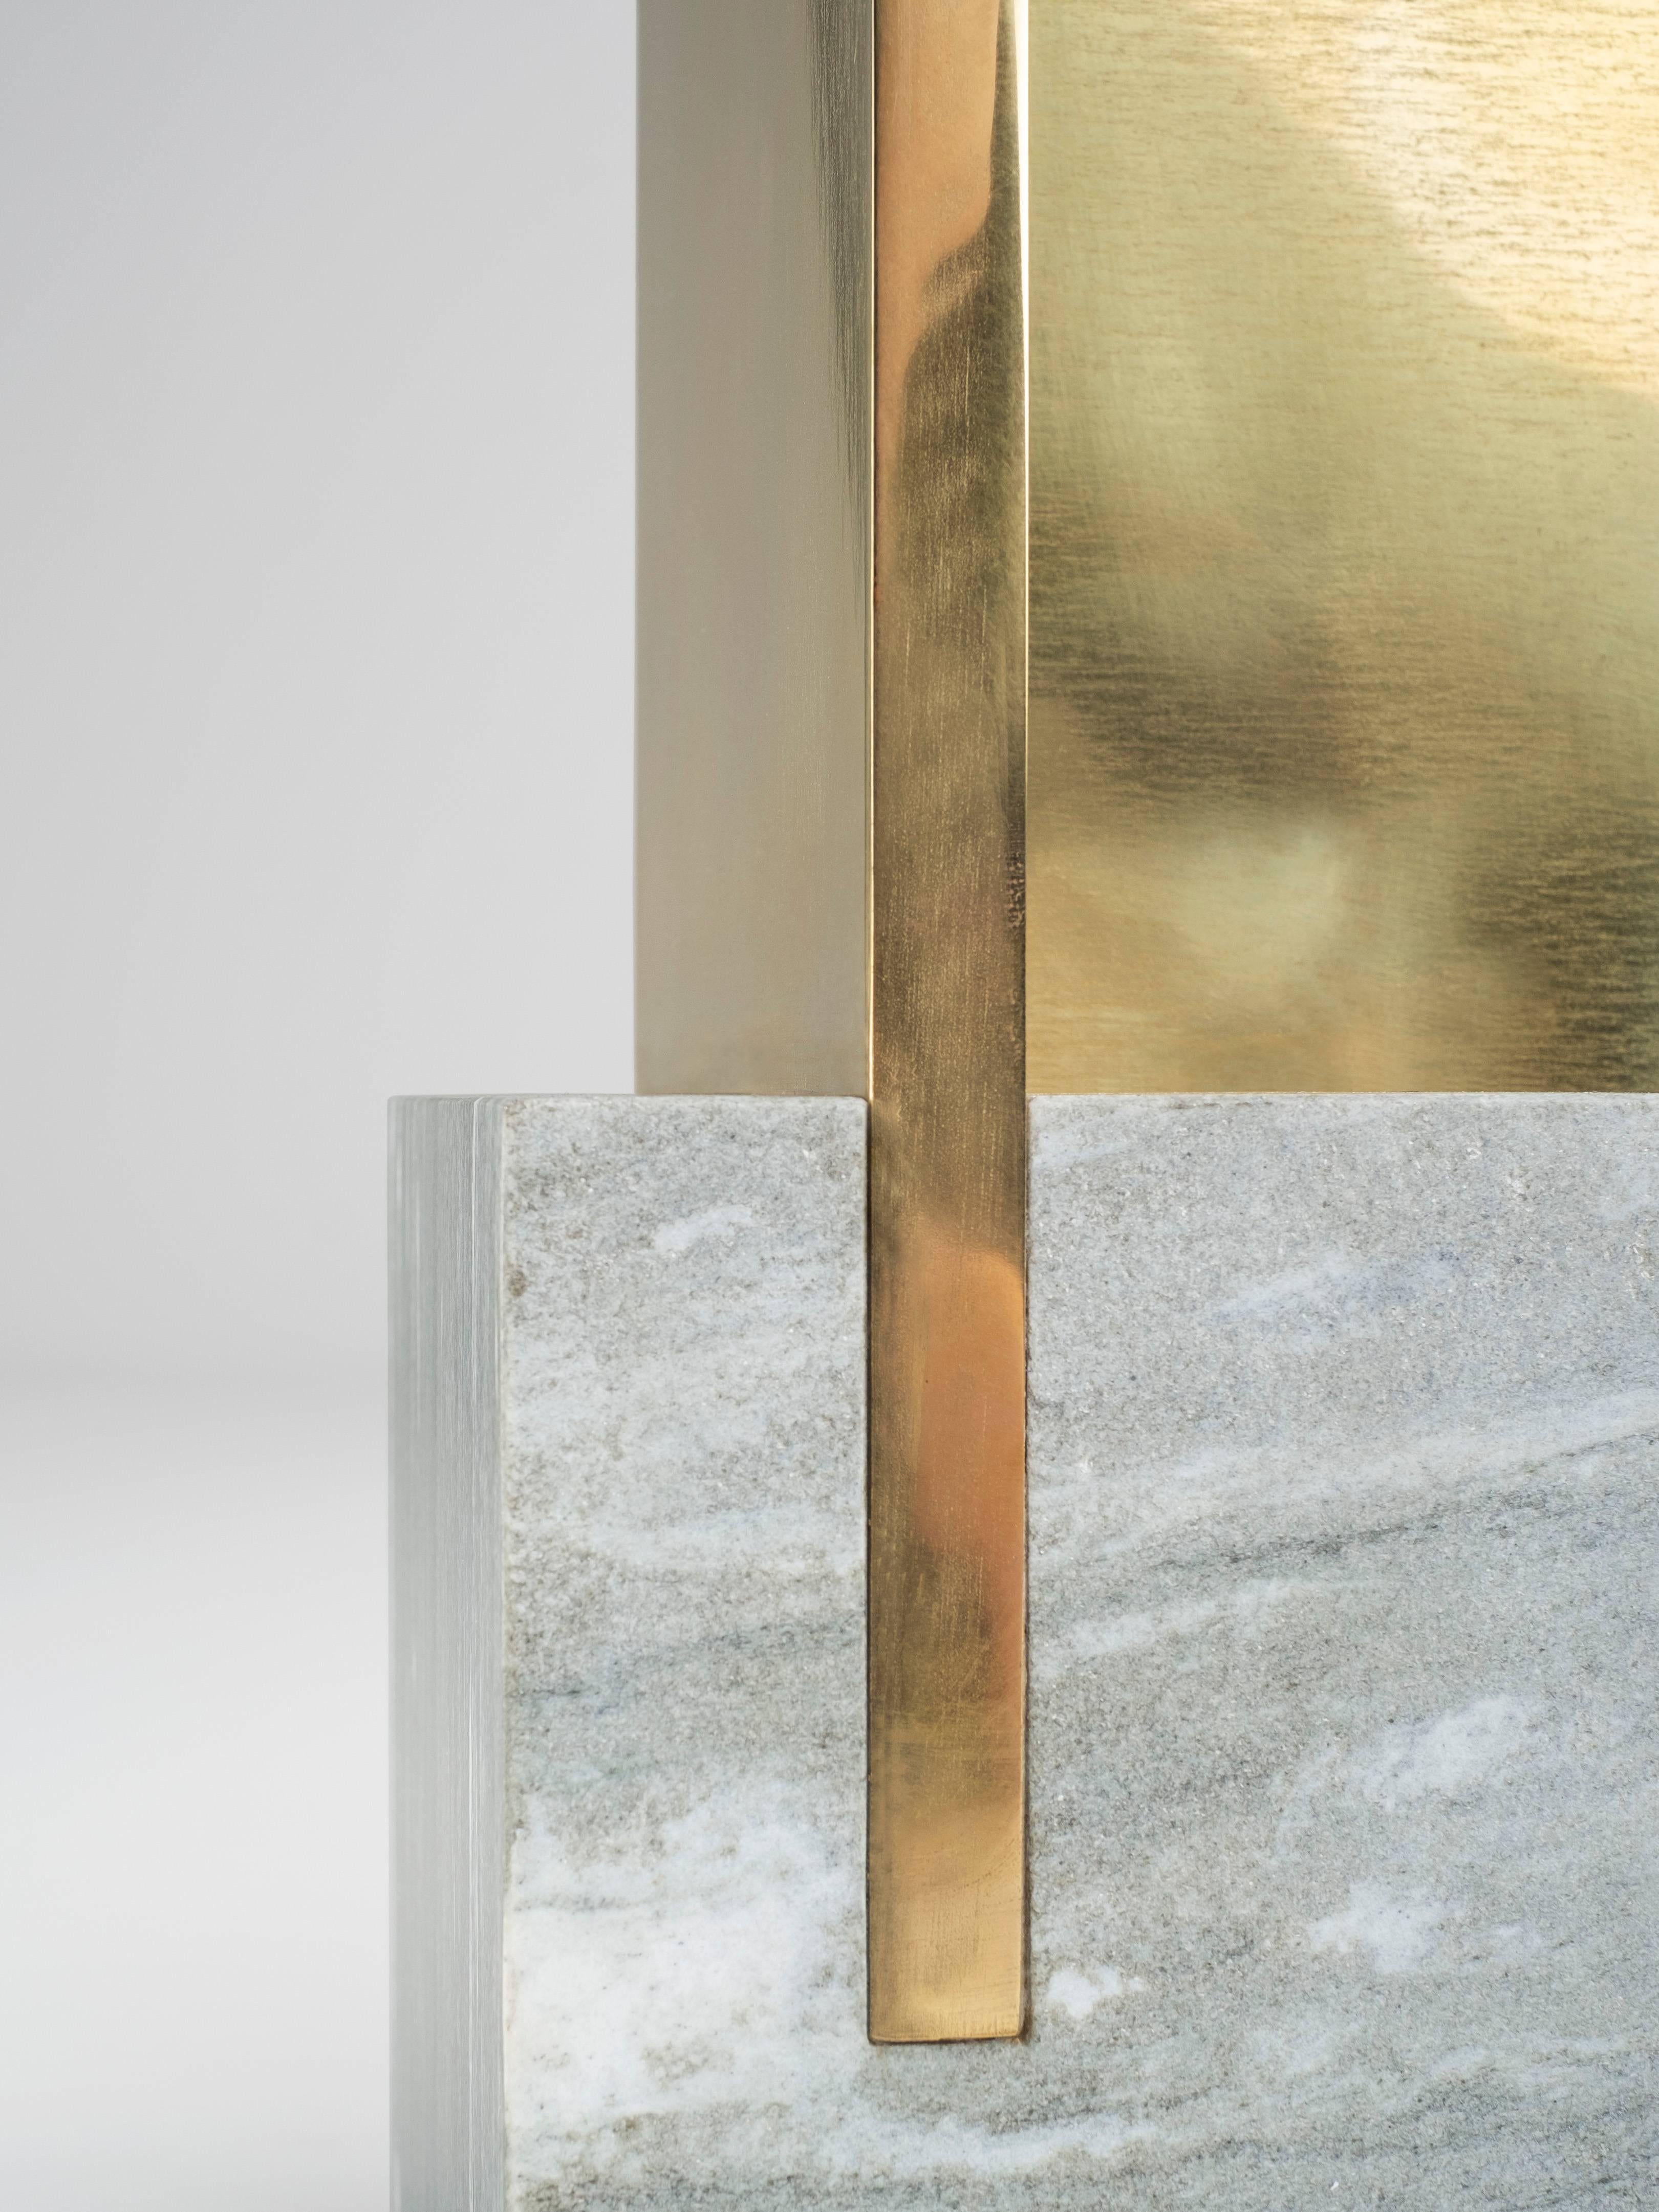 IF Table 17
Marble and brass
H55 L19 W30 cm
Edition: 8P + 2AP

The Collection ‘Further From Function’ includes seven subtle variations
of a small table ‘IF’ and a limited edition of a sculptural side table ‘KEPT’.
Produced in silver-grey